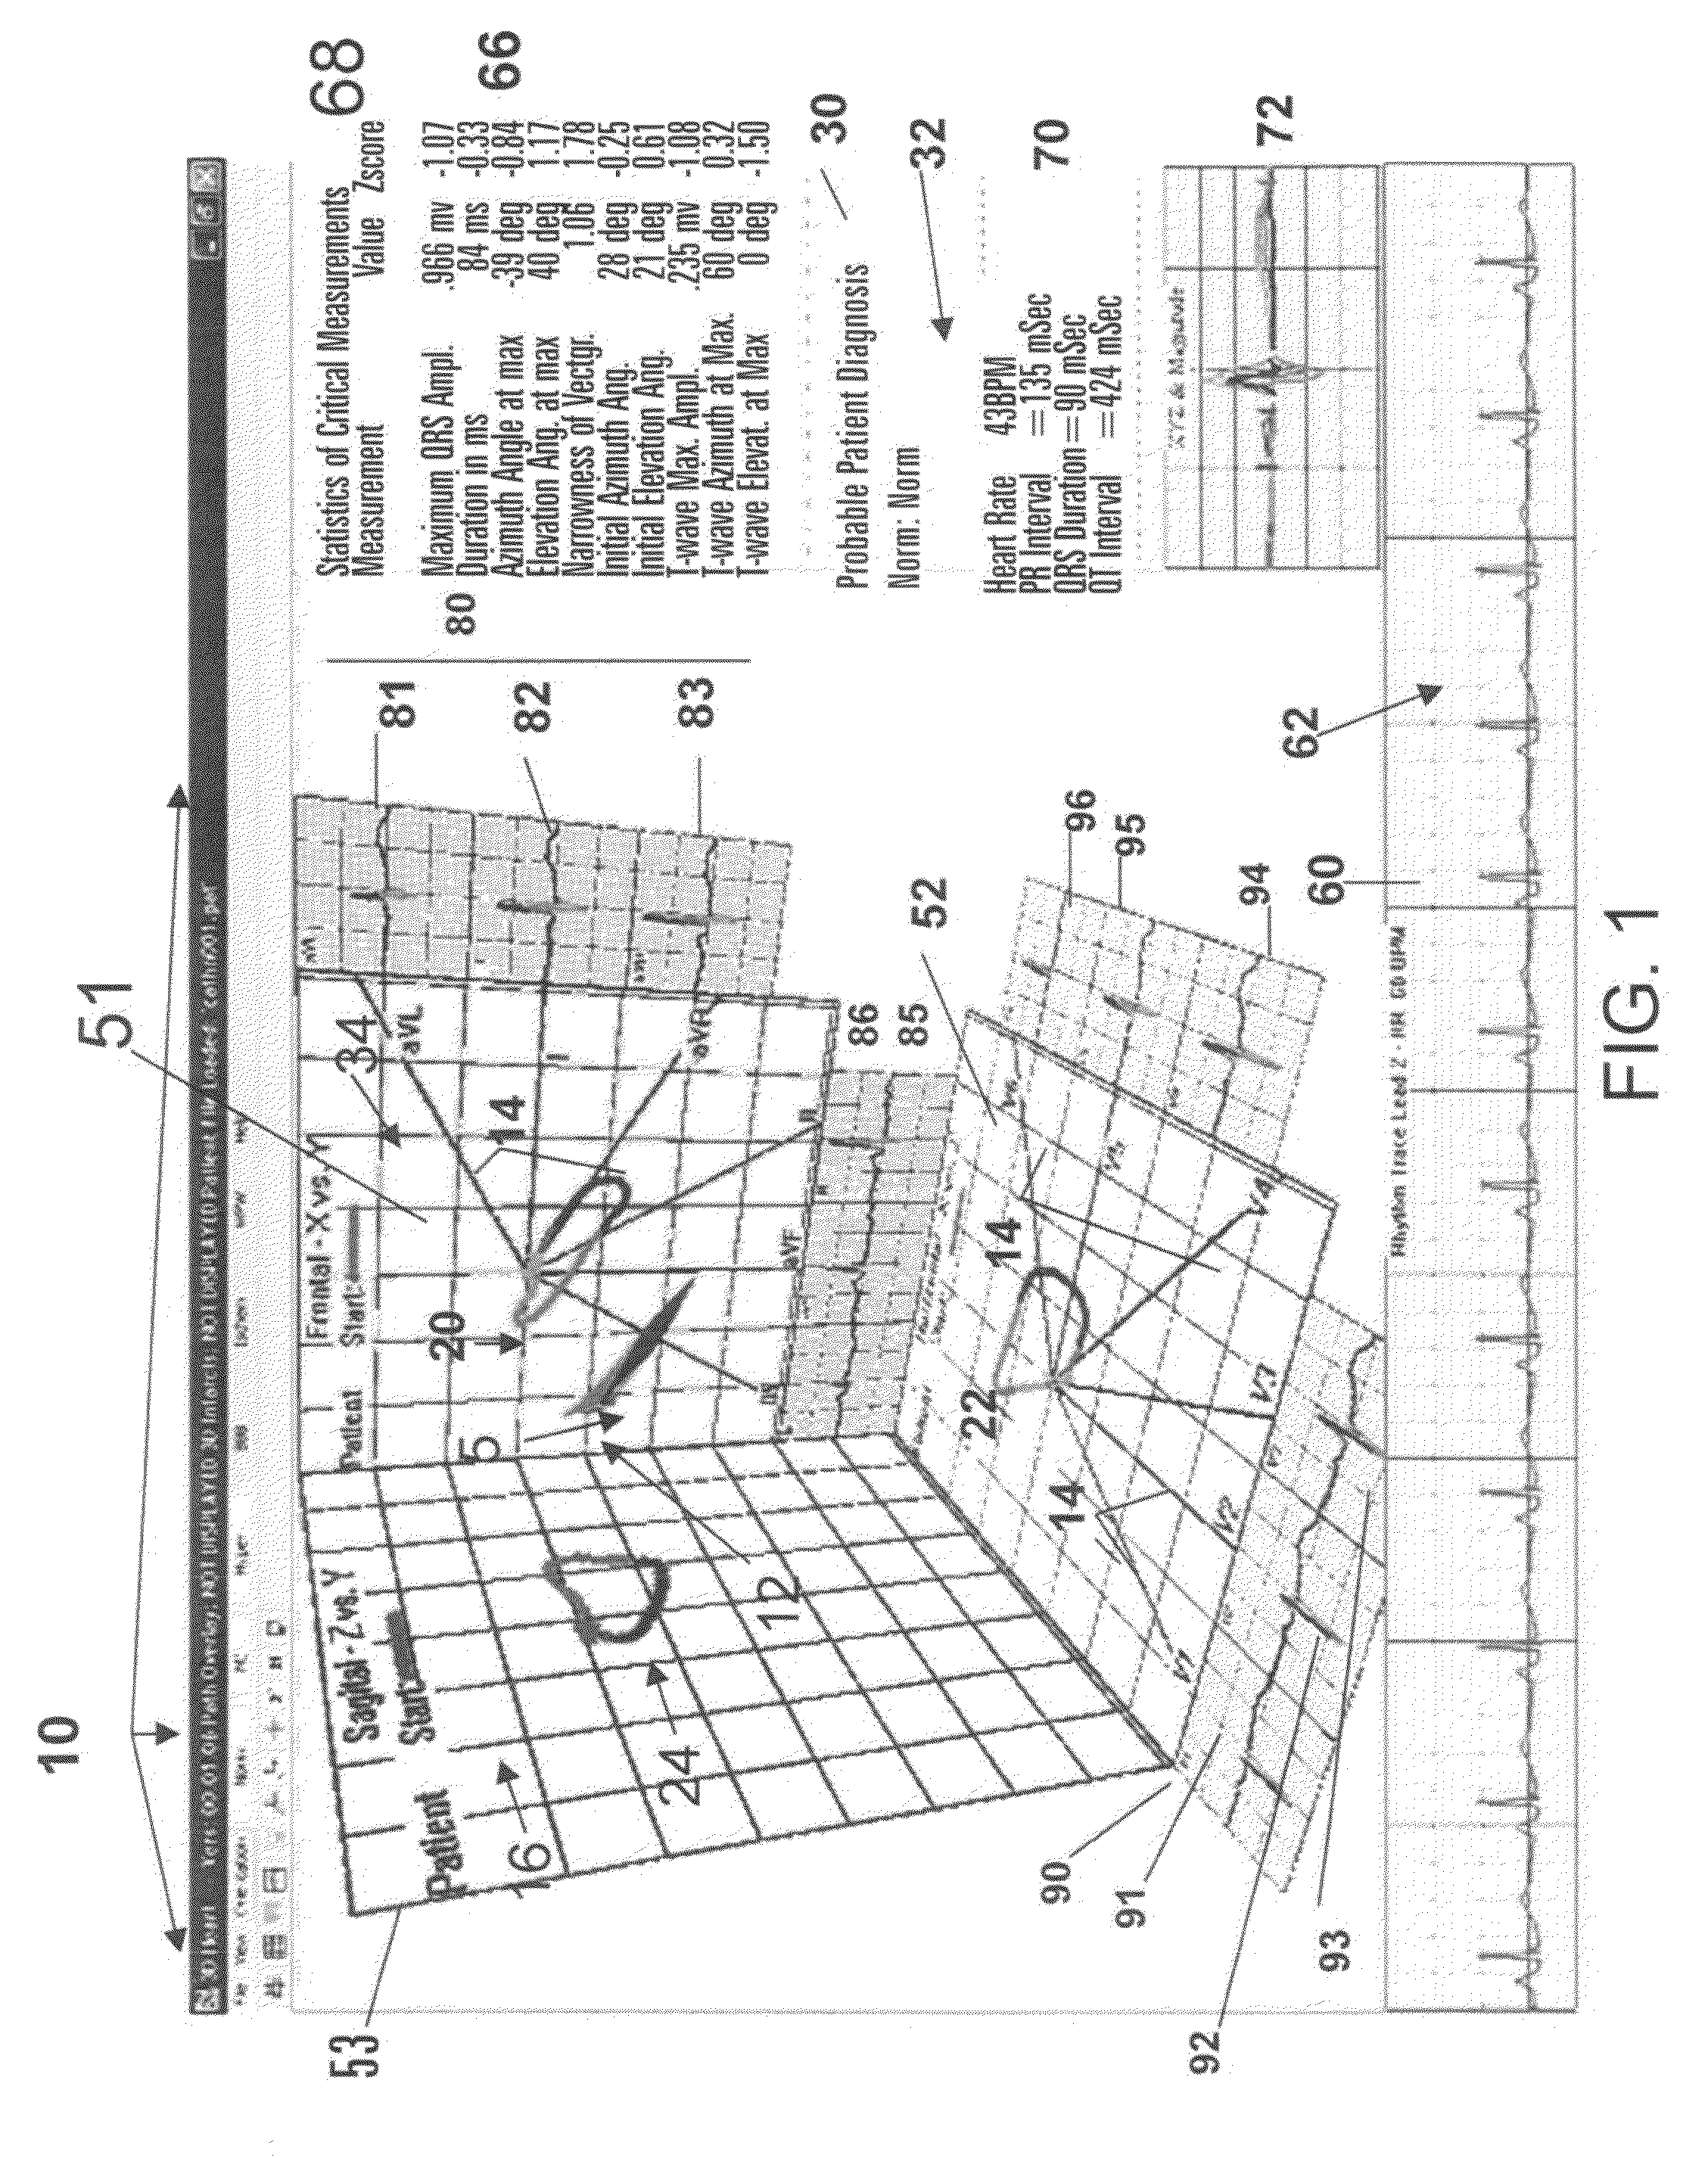 Location and displaying an ischemic region for ECG diagnostics